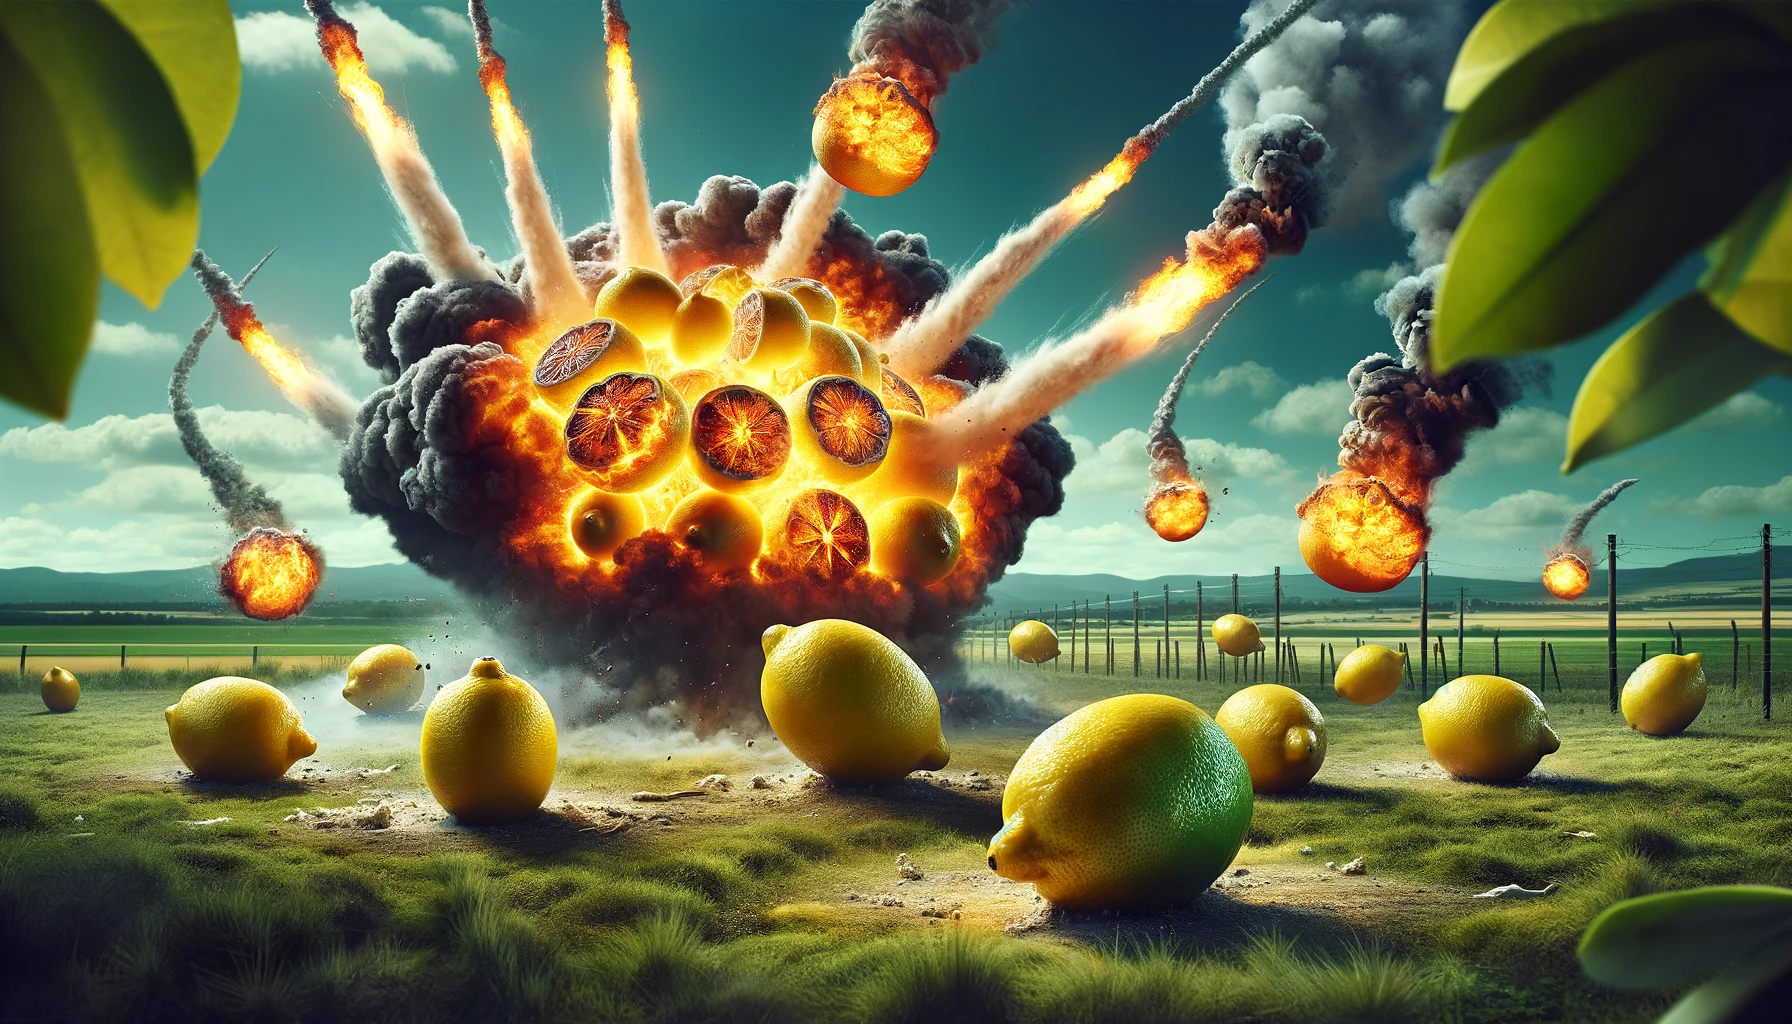 Imagine a dynamic widescreen scene depicting the concept of combustible lemons. These lemons are not just ordinary fruit; they are designed to explode, adding a humorous twist to the idea. The scene captures several lemons in various stages of combustion, with flames and smoke billowing out from them. The background is an open field, hinting at a controlled environment for testing these unusual lemons. Bright, fiery explosions contrast against the serene, green backdrop, highlighting the surreal nature of combustible lemons. The scene is filled with action, as some lemons are caught in the act of exploding, while others are ready to ignite, creating a spectacle of fire and citrus.